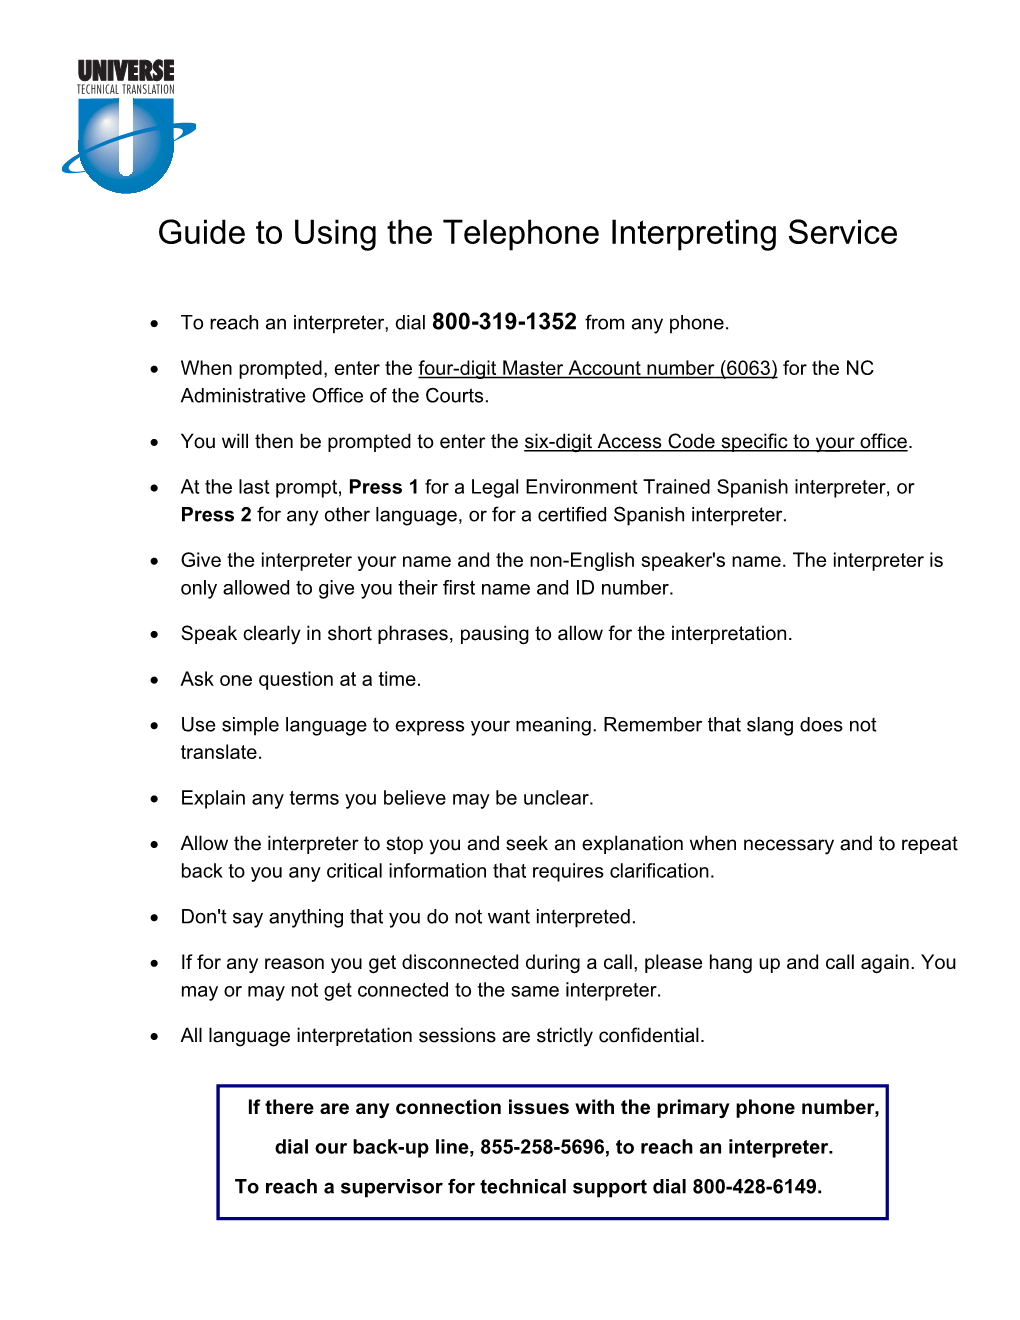 Guide to Using the Telephone Interpreting Service